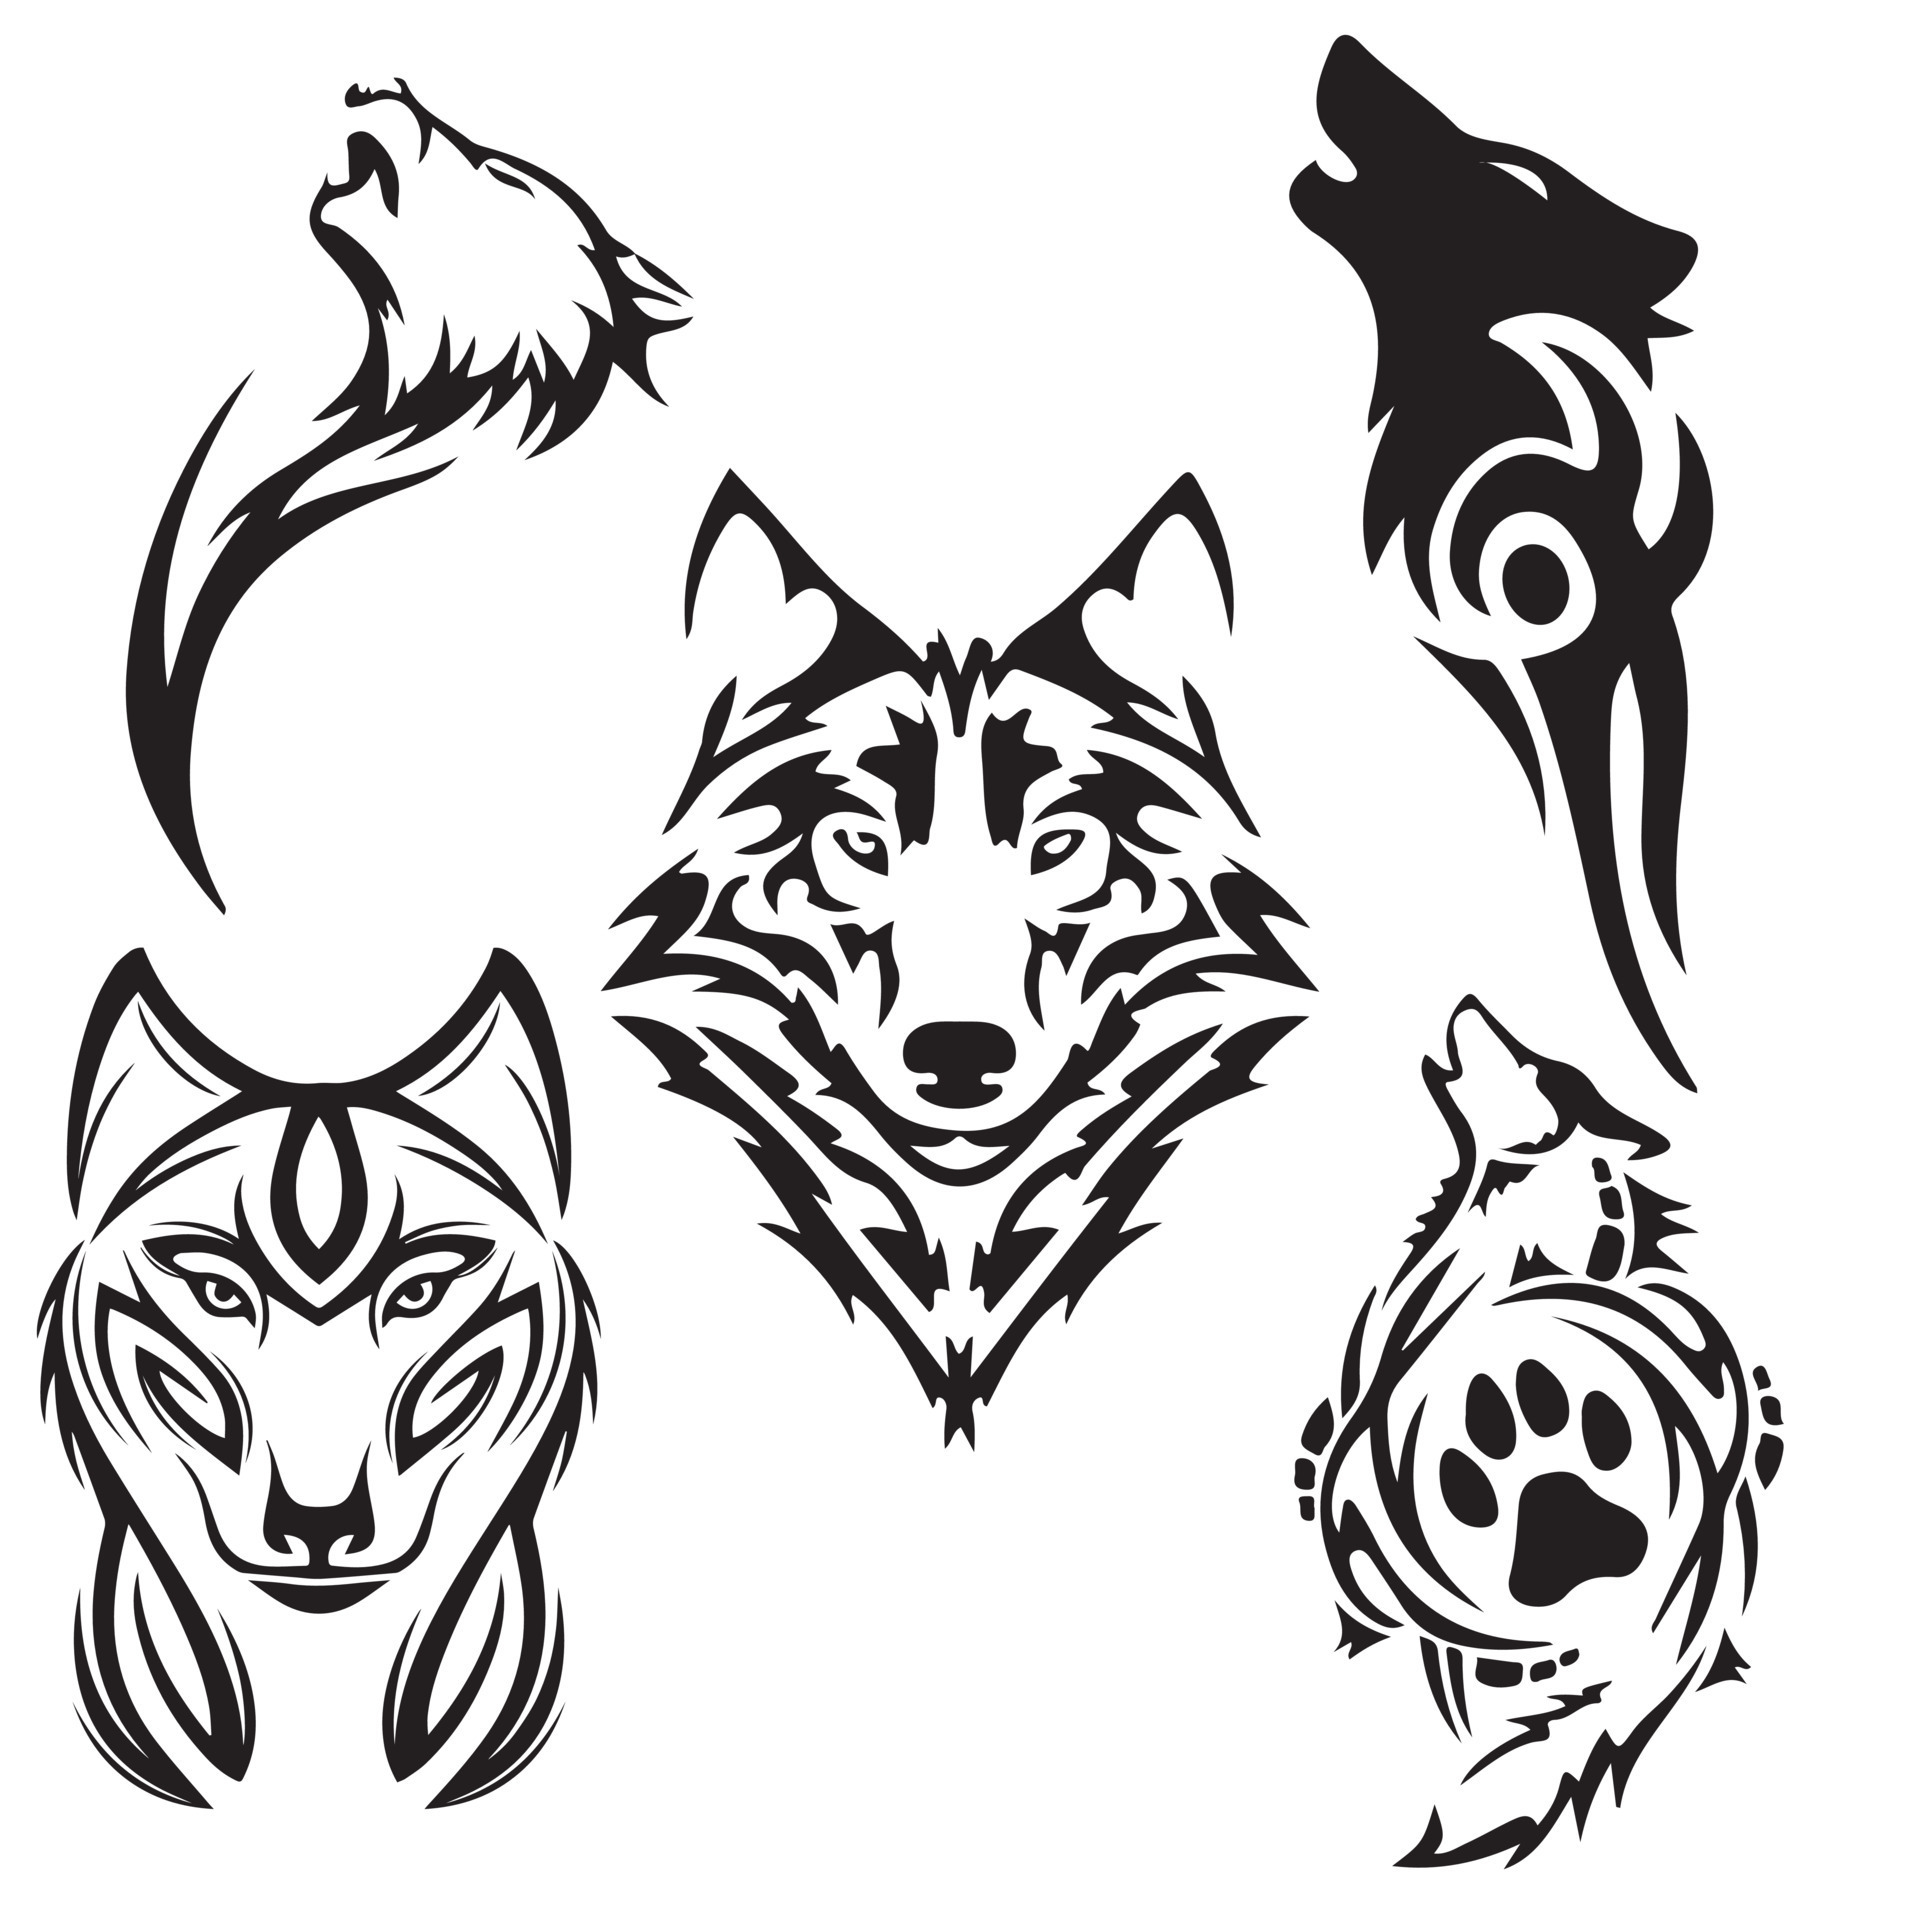 110 Background Of Angry Wolf Tattoo Design Illustrations RoyaltyFree  Vector Graphics  Clip Art  iStock